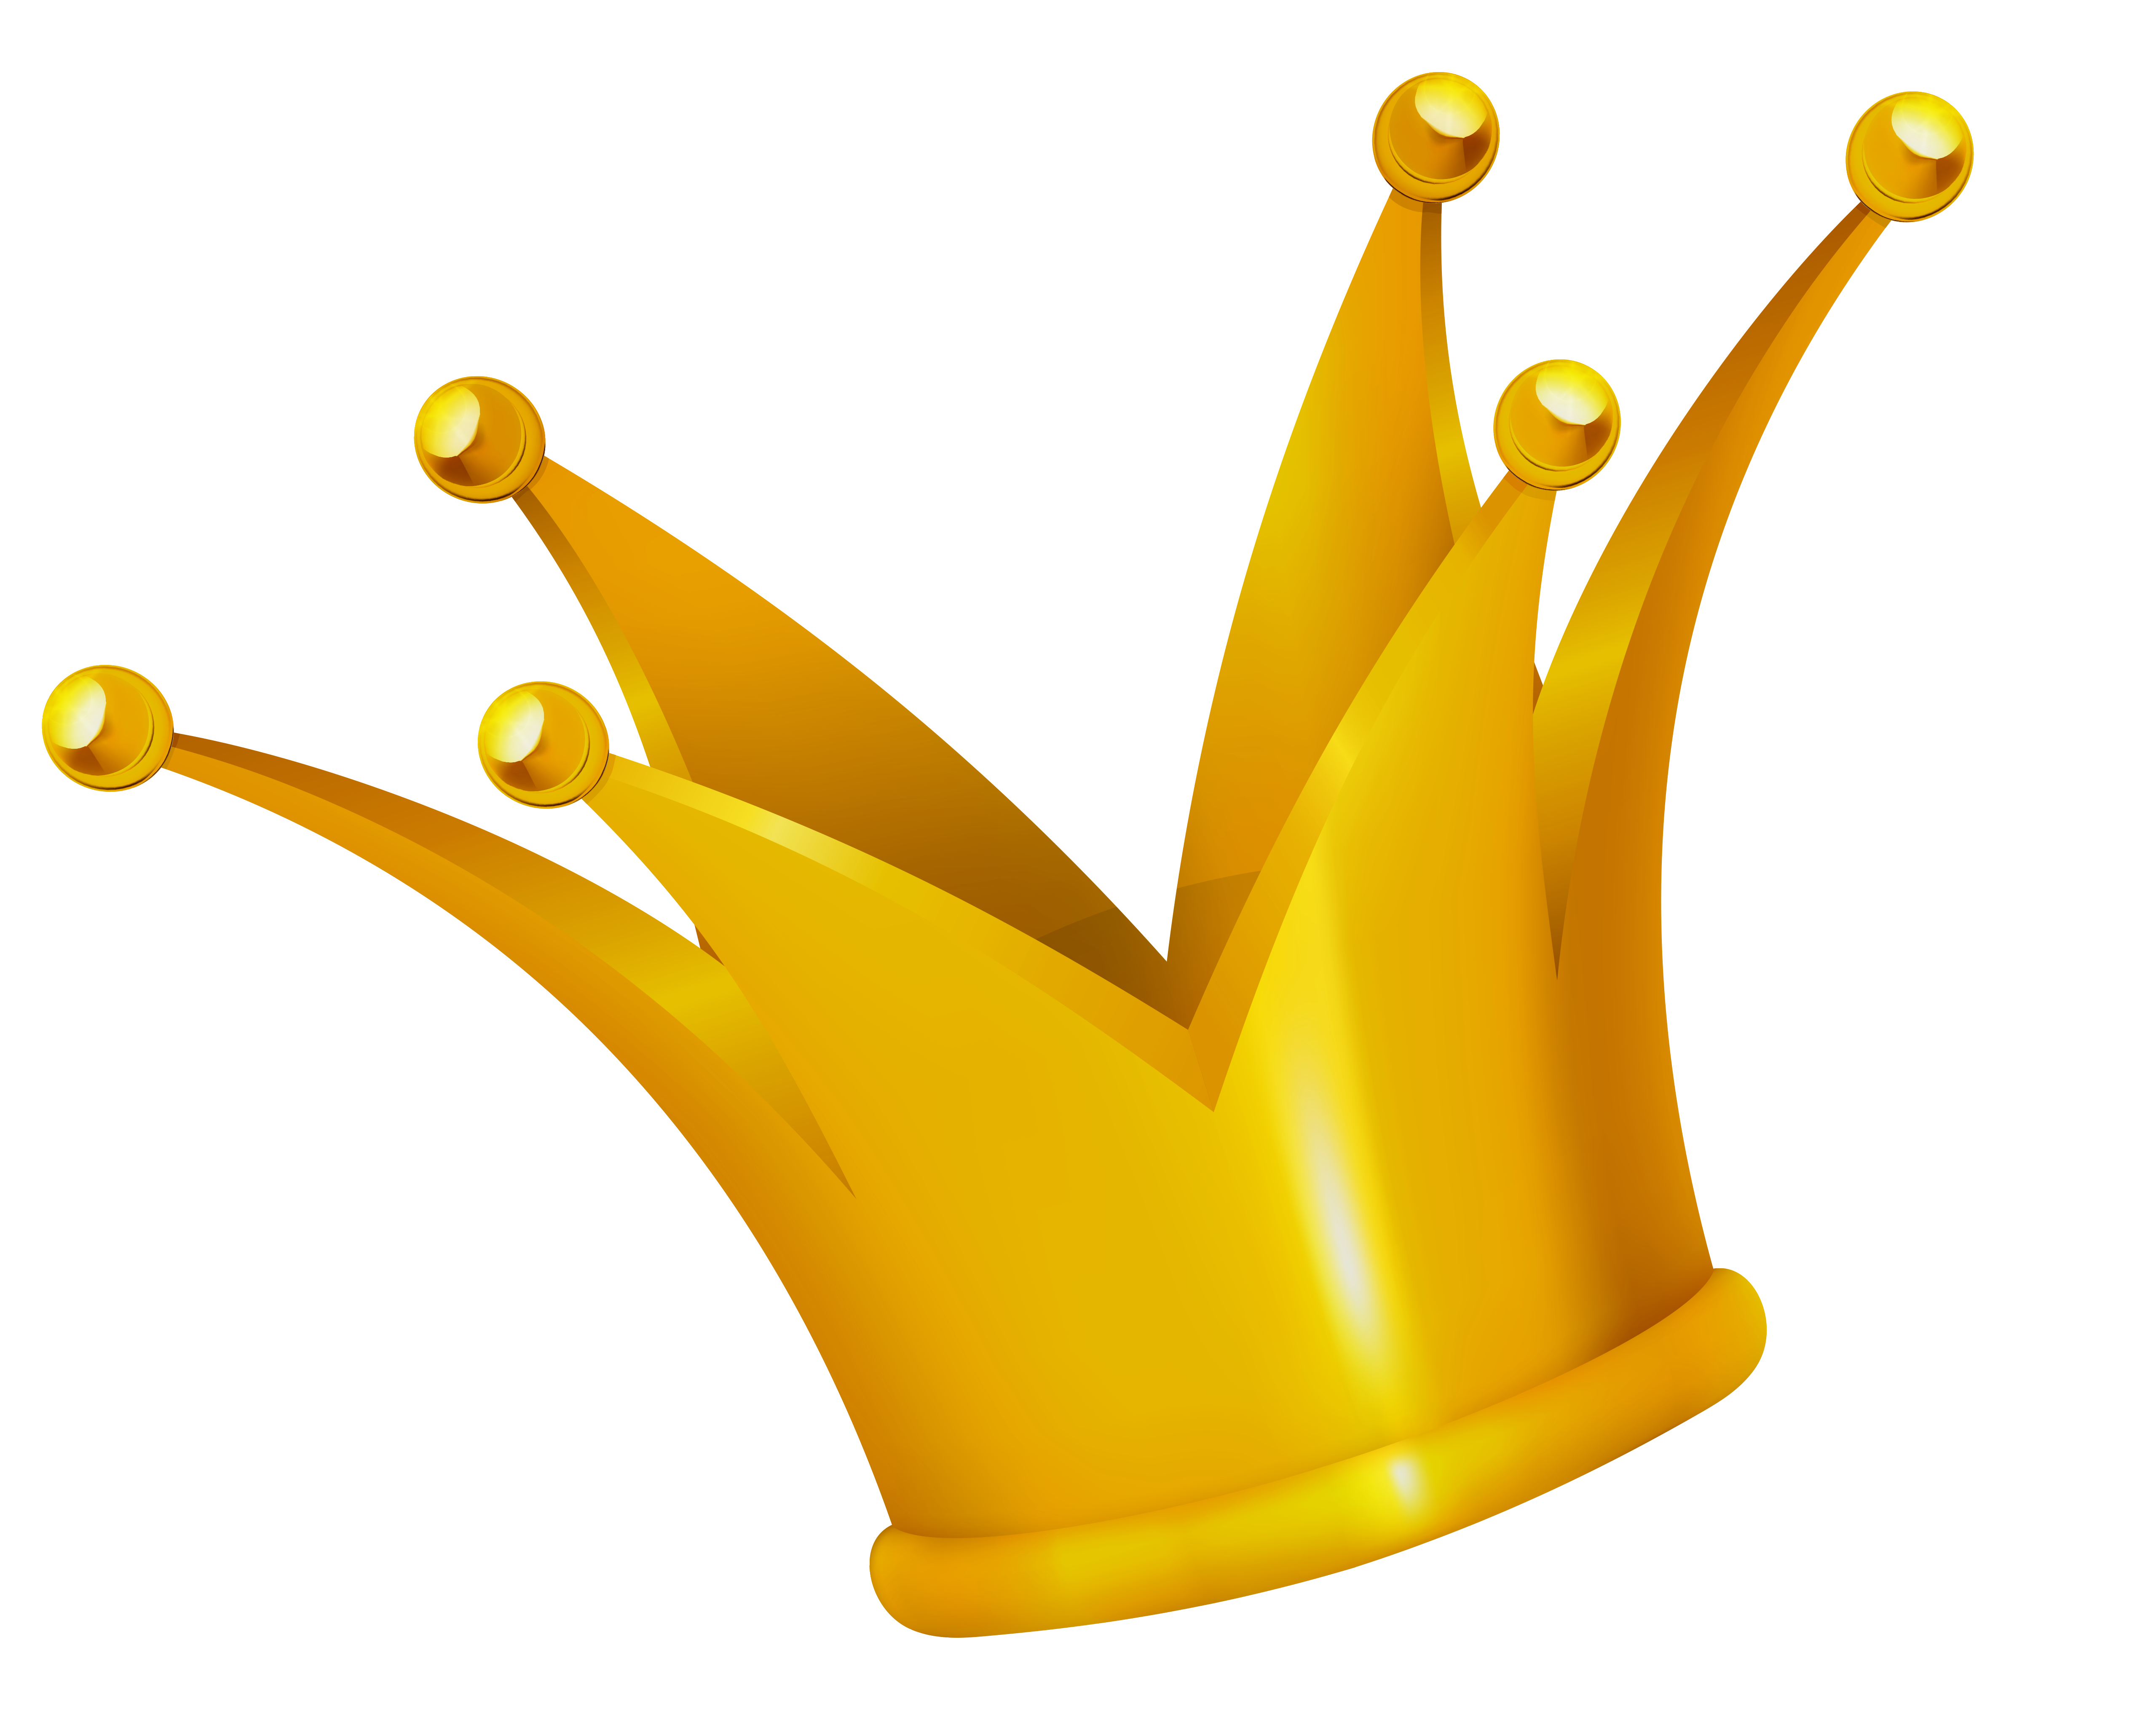 Crown Clipart Black And White